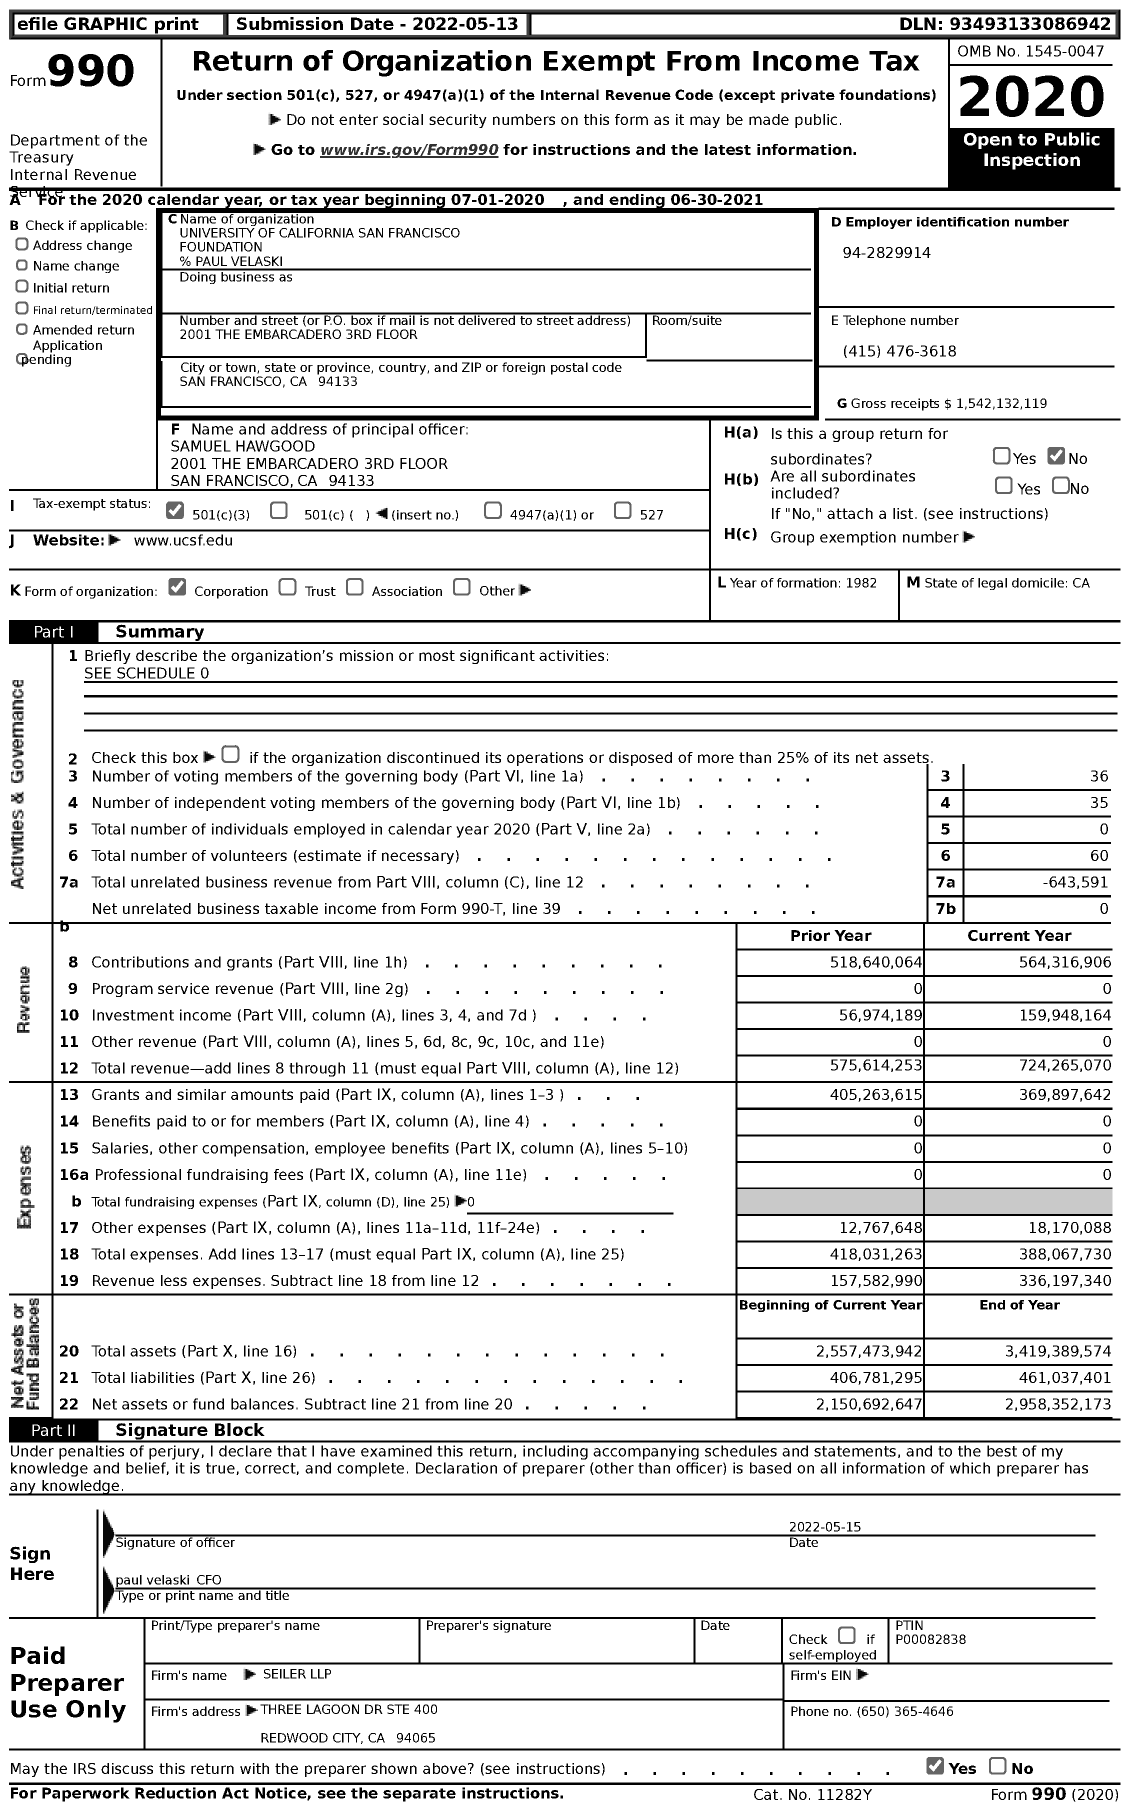 Image of first page of 2020 Form 990 for University of California San Francisco Foundation (UCSF)